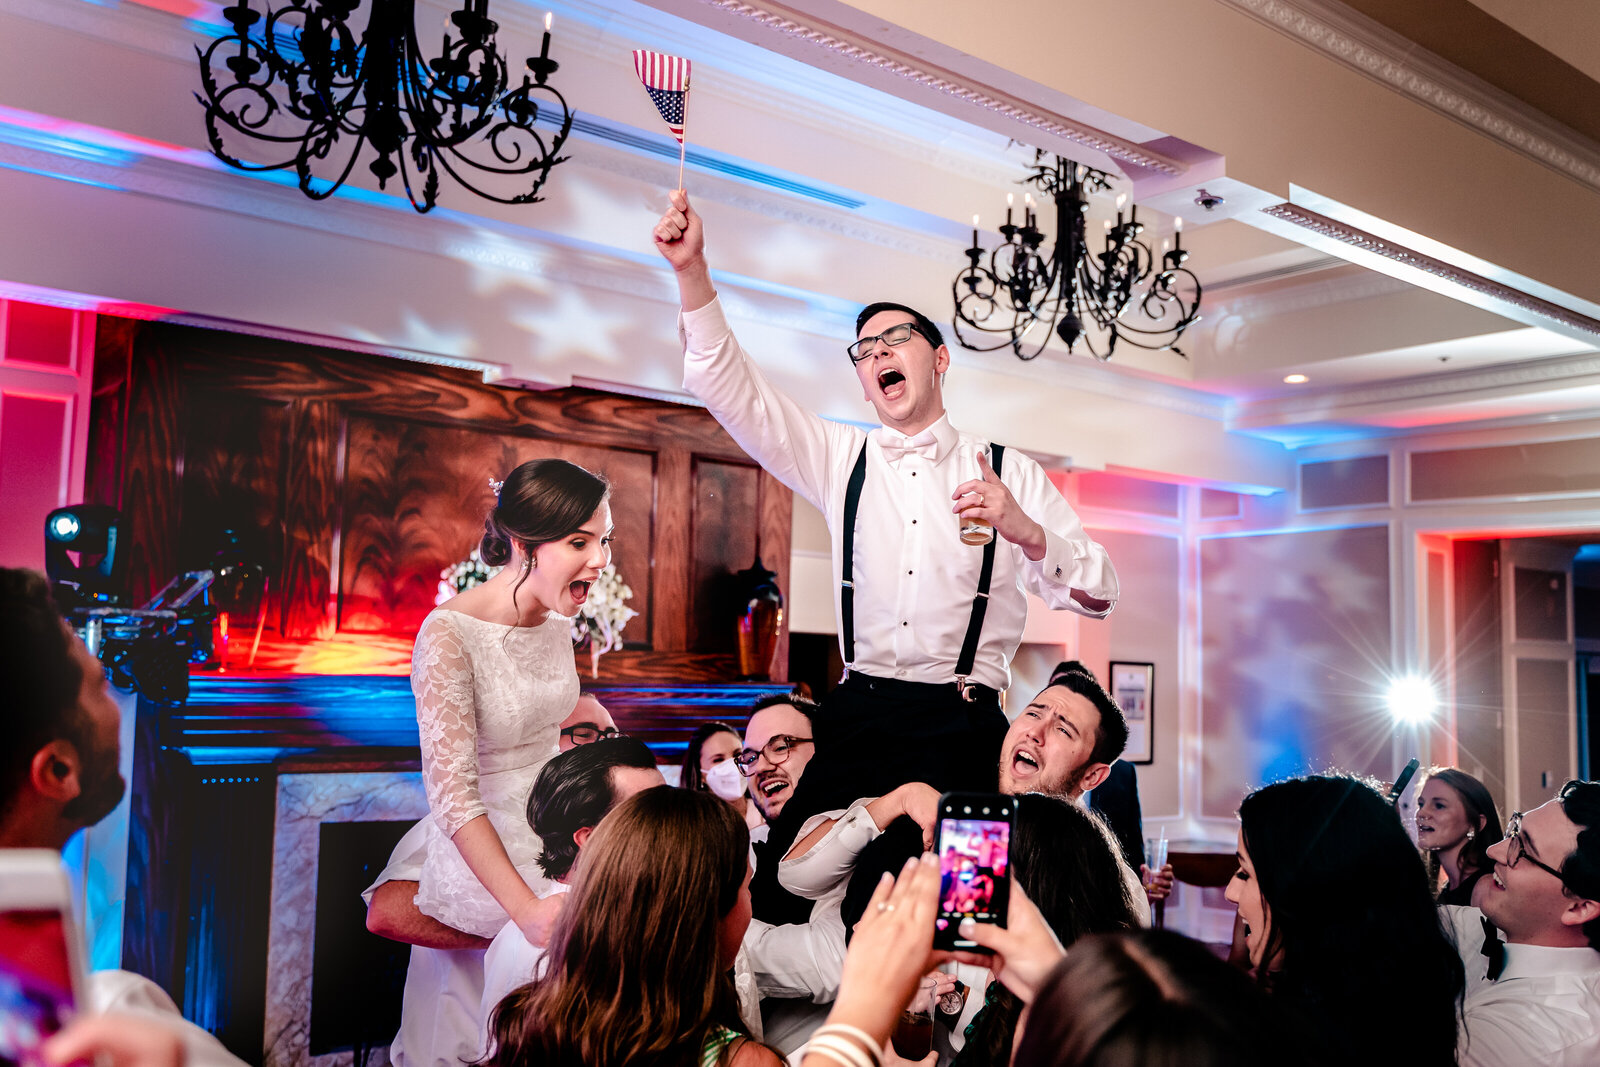 A bride and groom celebrate during their wedding reception at the Country Club of Fairfax after their Catholic wedding in Northern Virginia